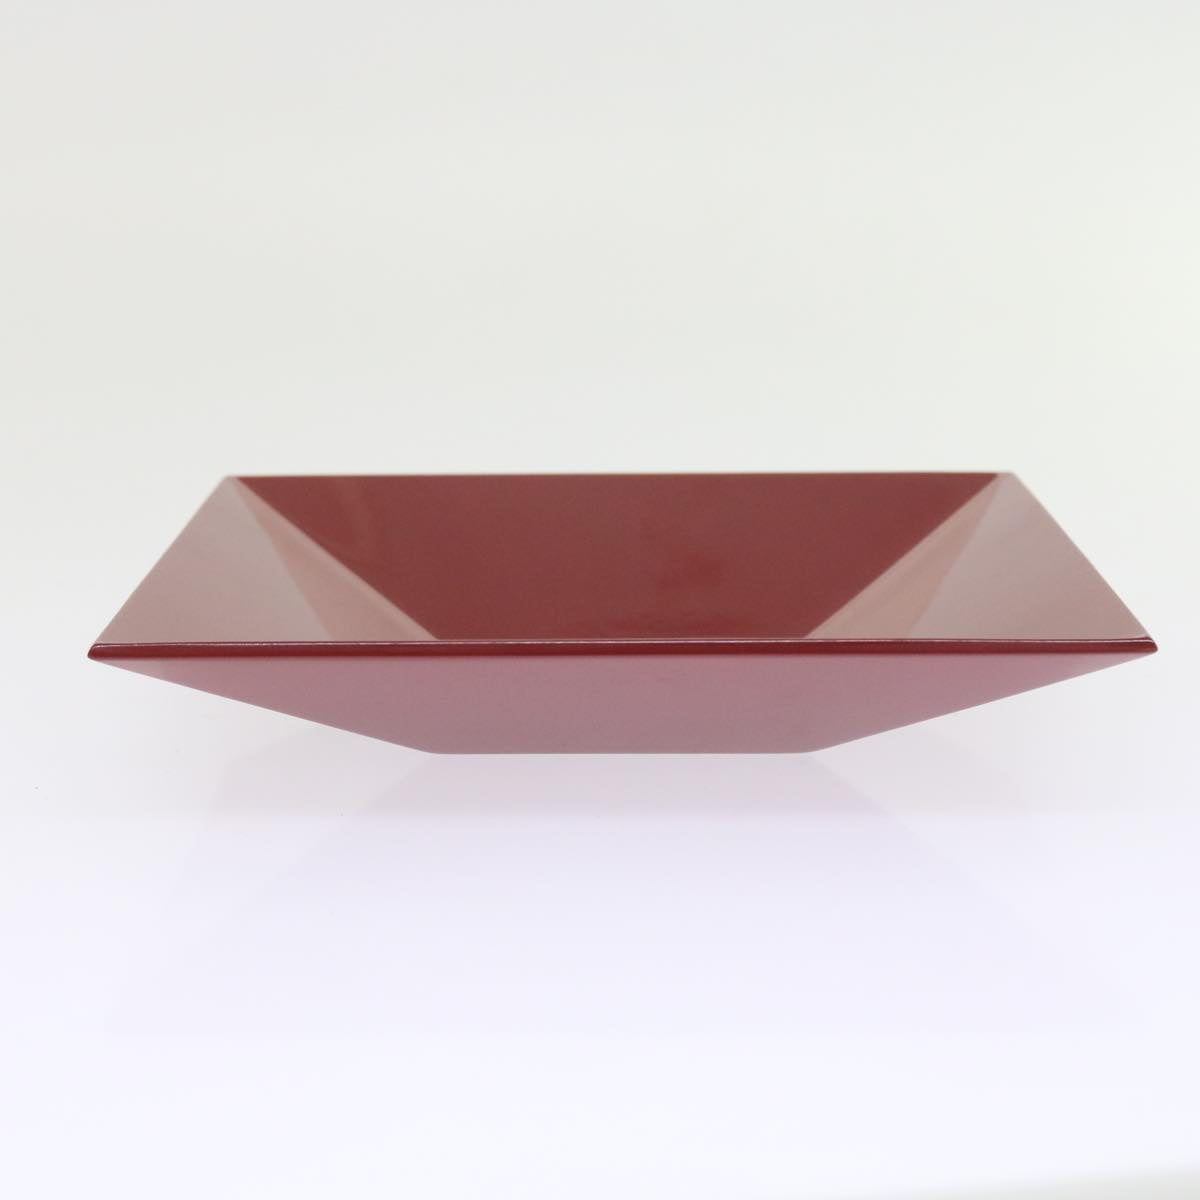 HERMES Buffalo Horn Square Plate Plastic Red Brown Auth bs8647